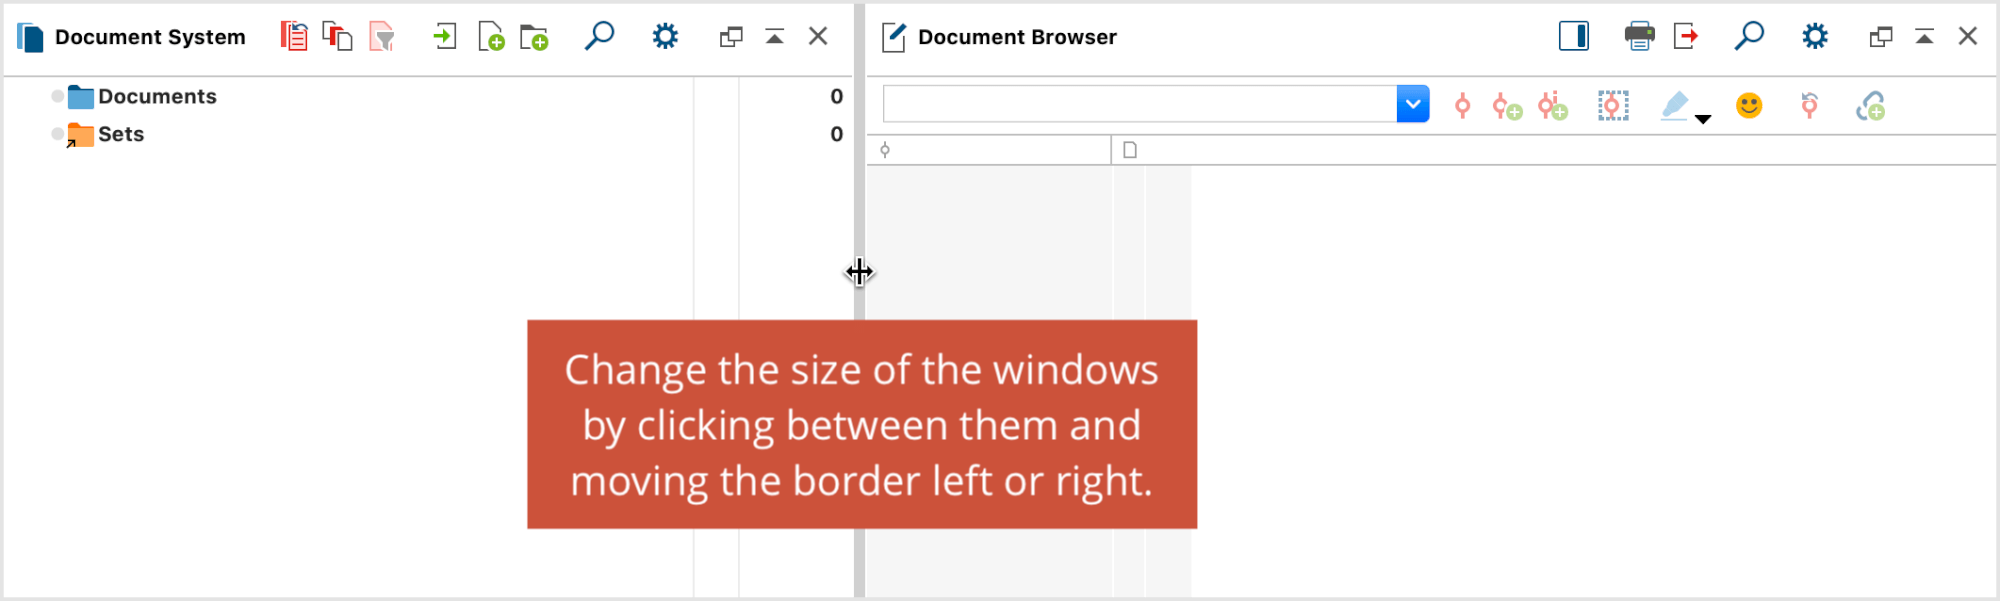 Window height and width can be adjusted by clicking and dragging borders with the mouse